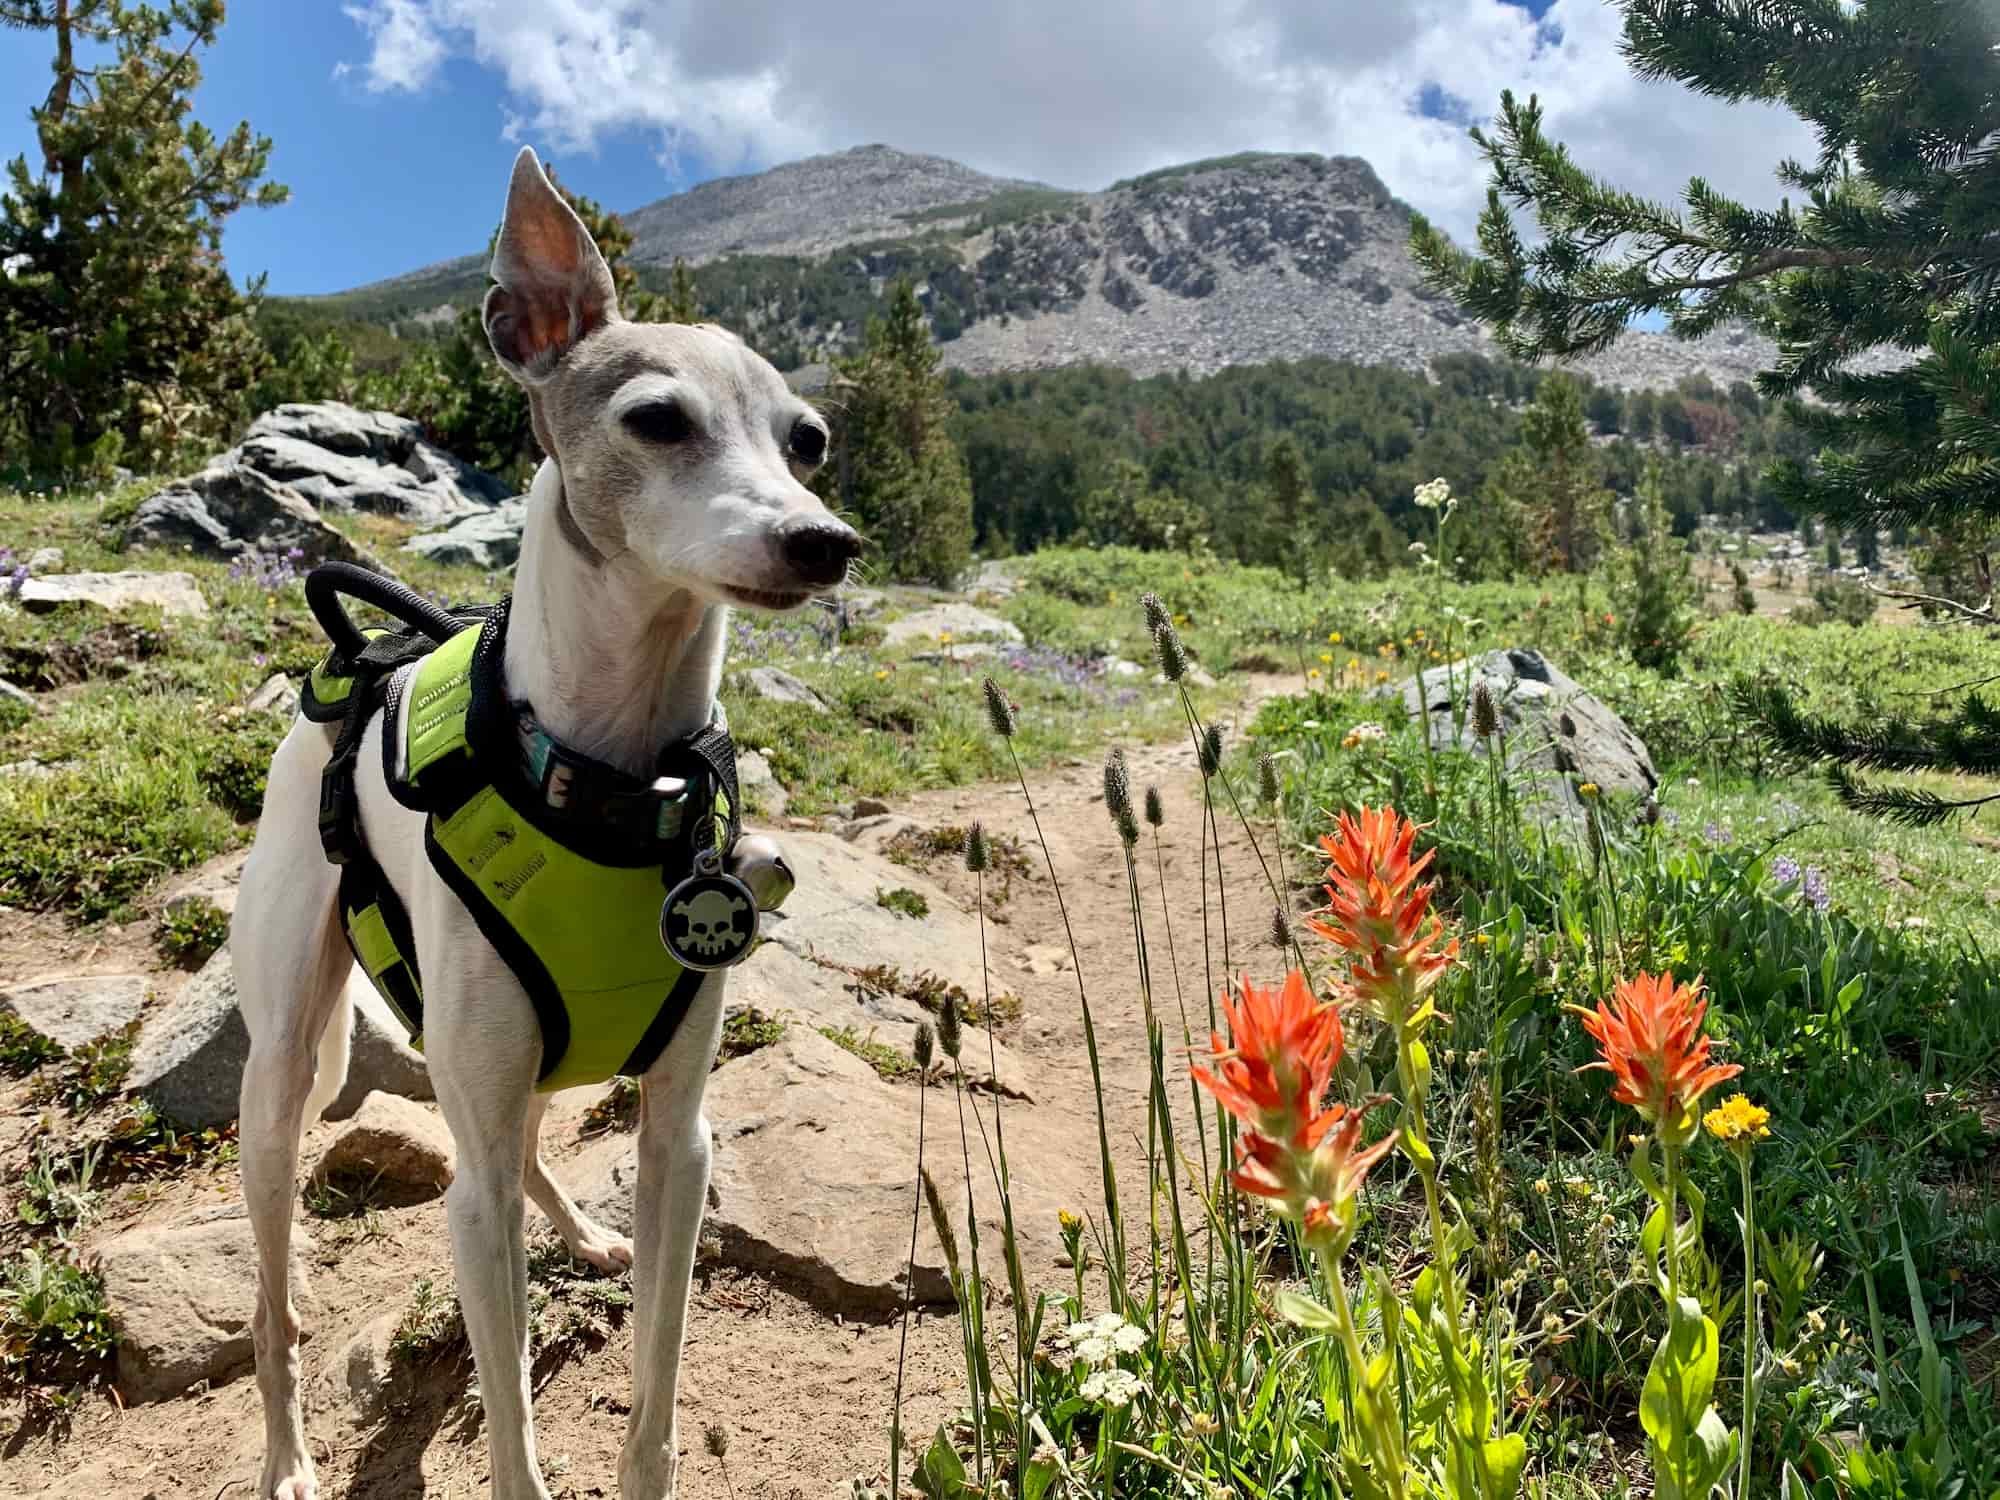 The 16 Best Hiking Gifts For Adventure Dogs - The Mandagies